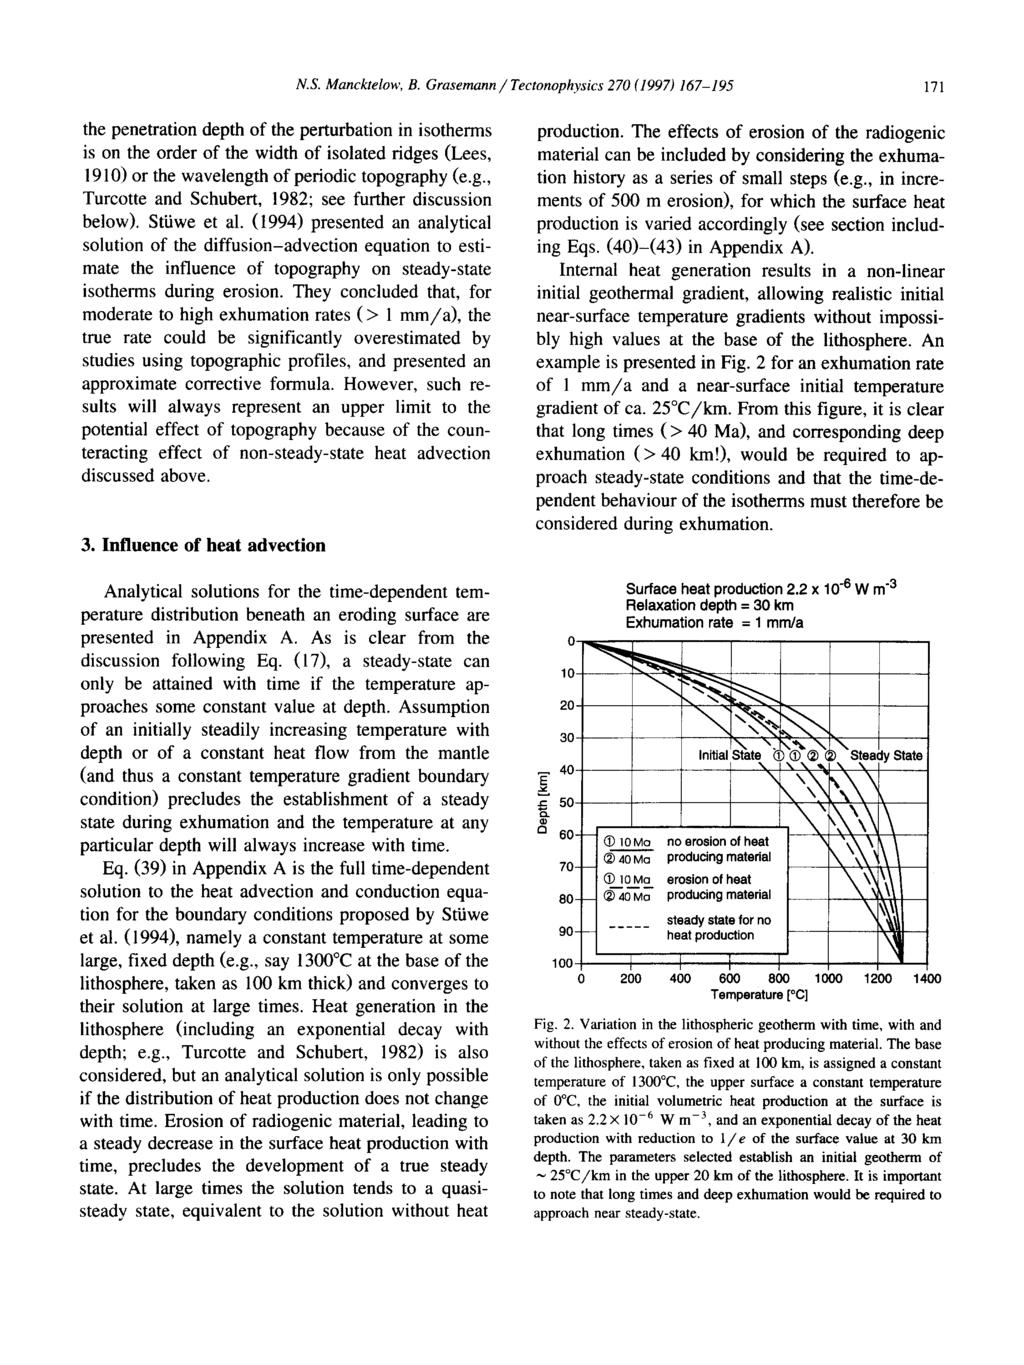 Thermal evolution in response to erosion g to- 40-50- a 60- Surface heat production 2.